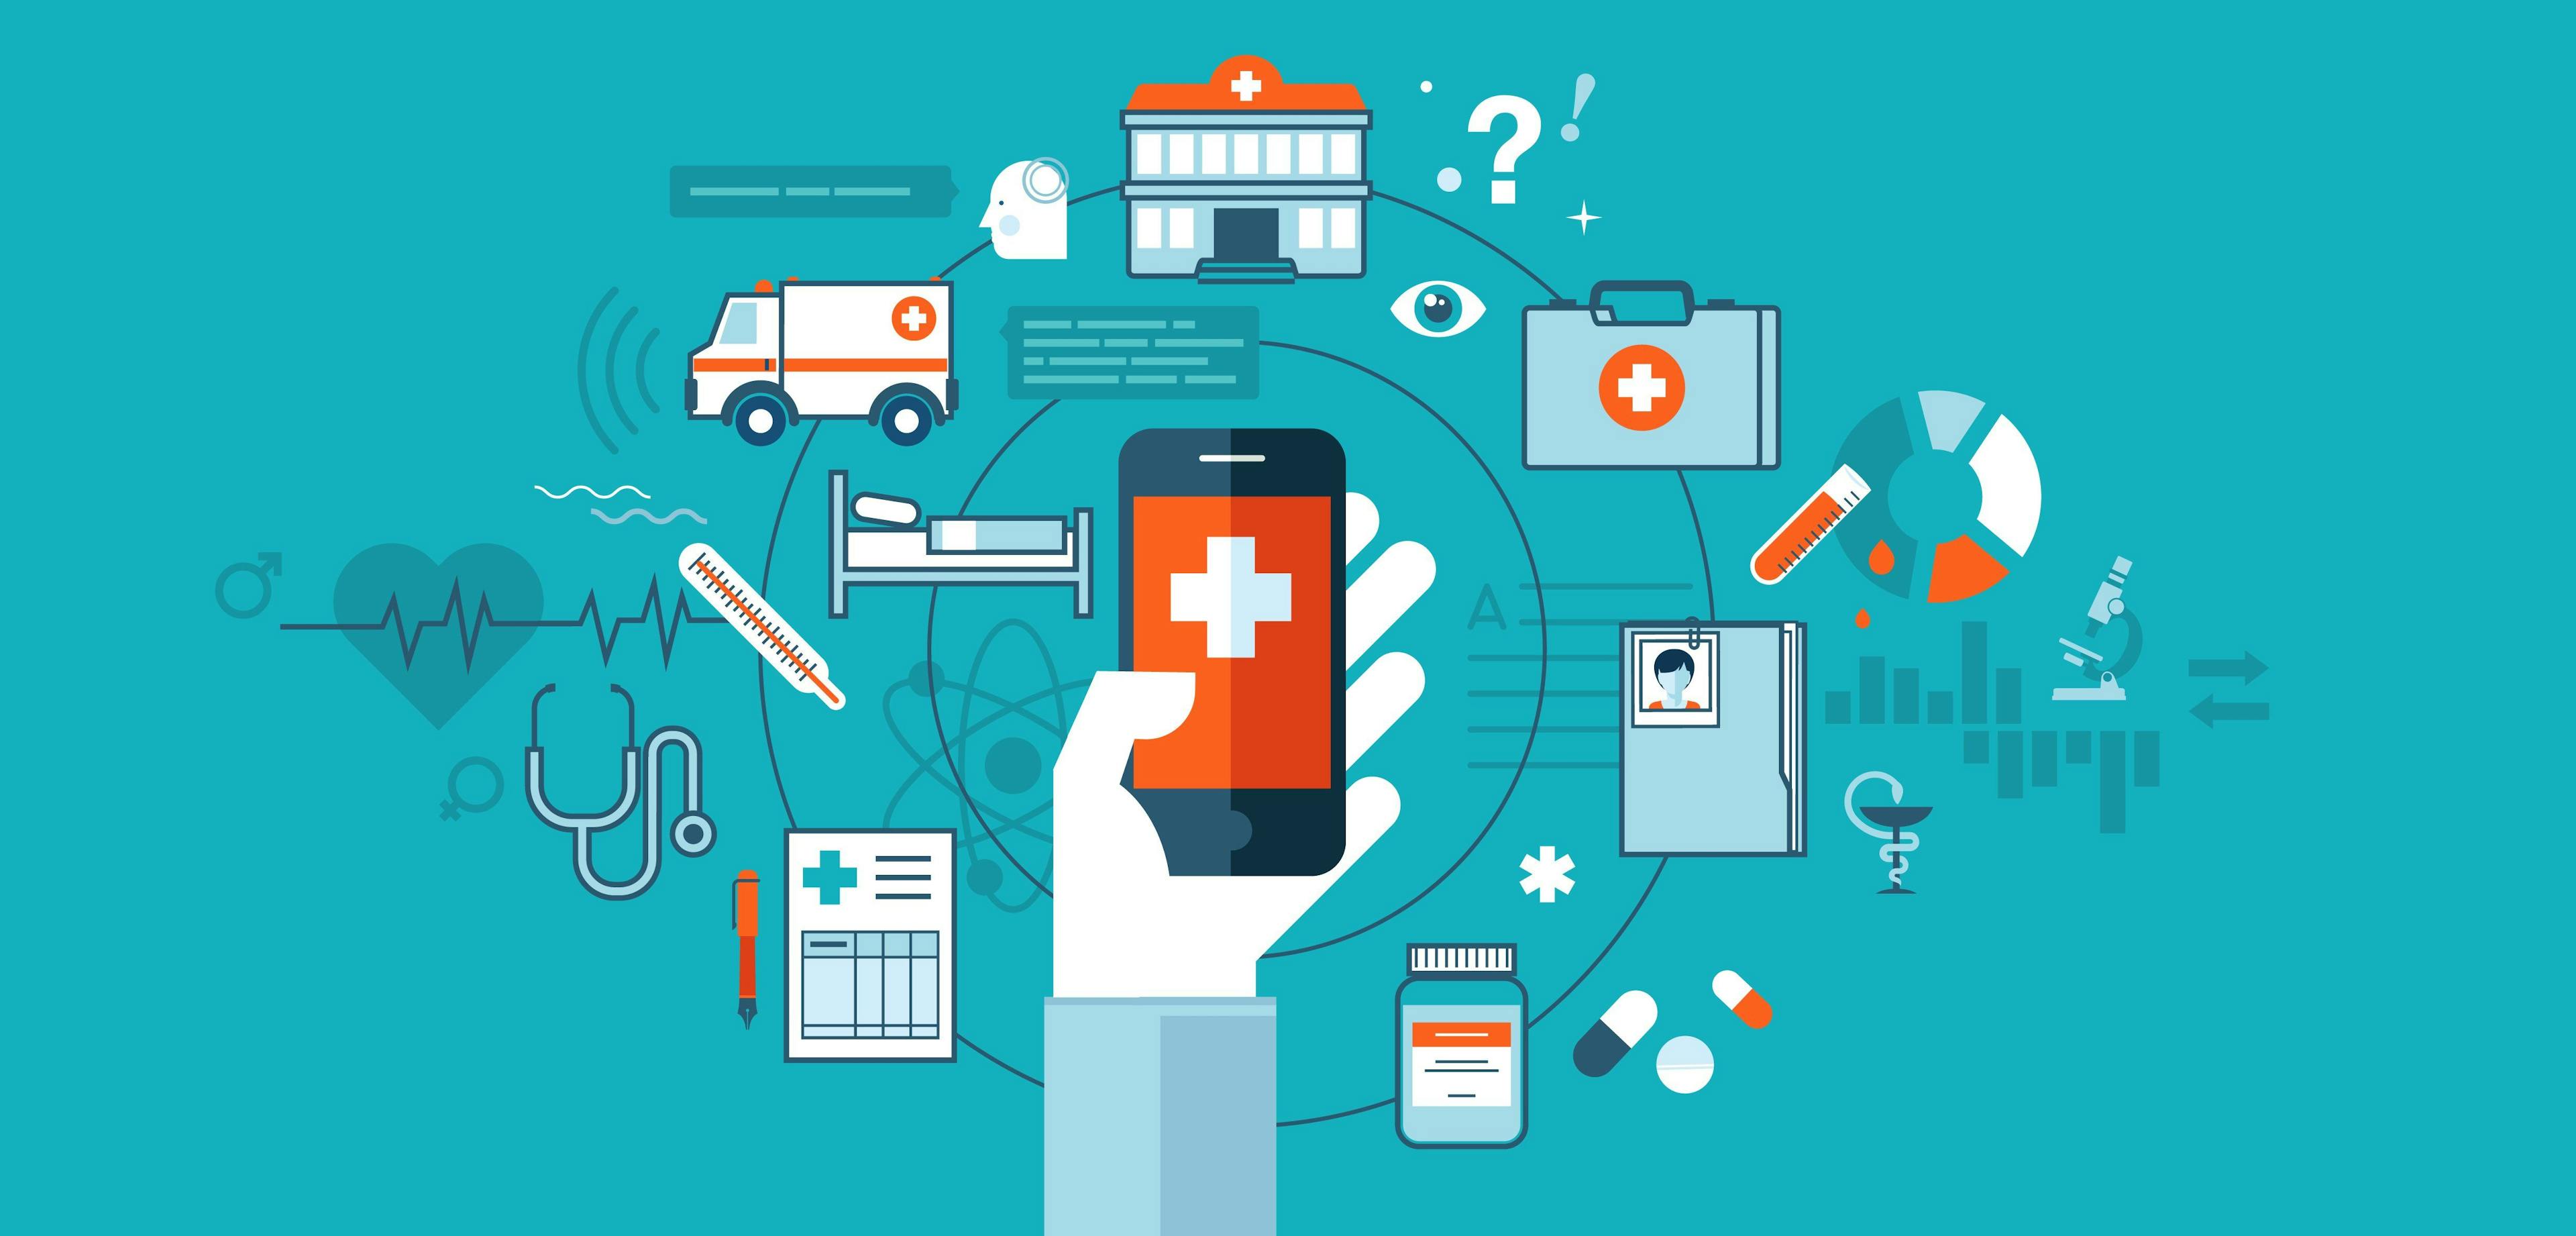 Getting Started with mHealth at Your Medical Practice